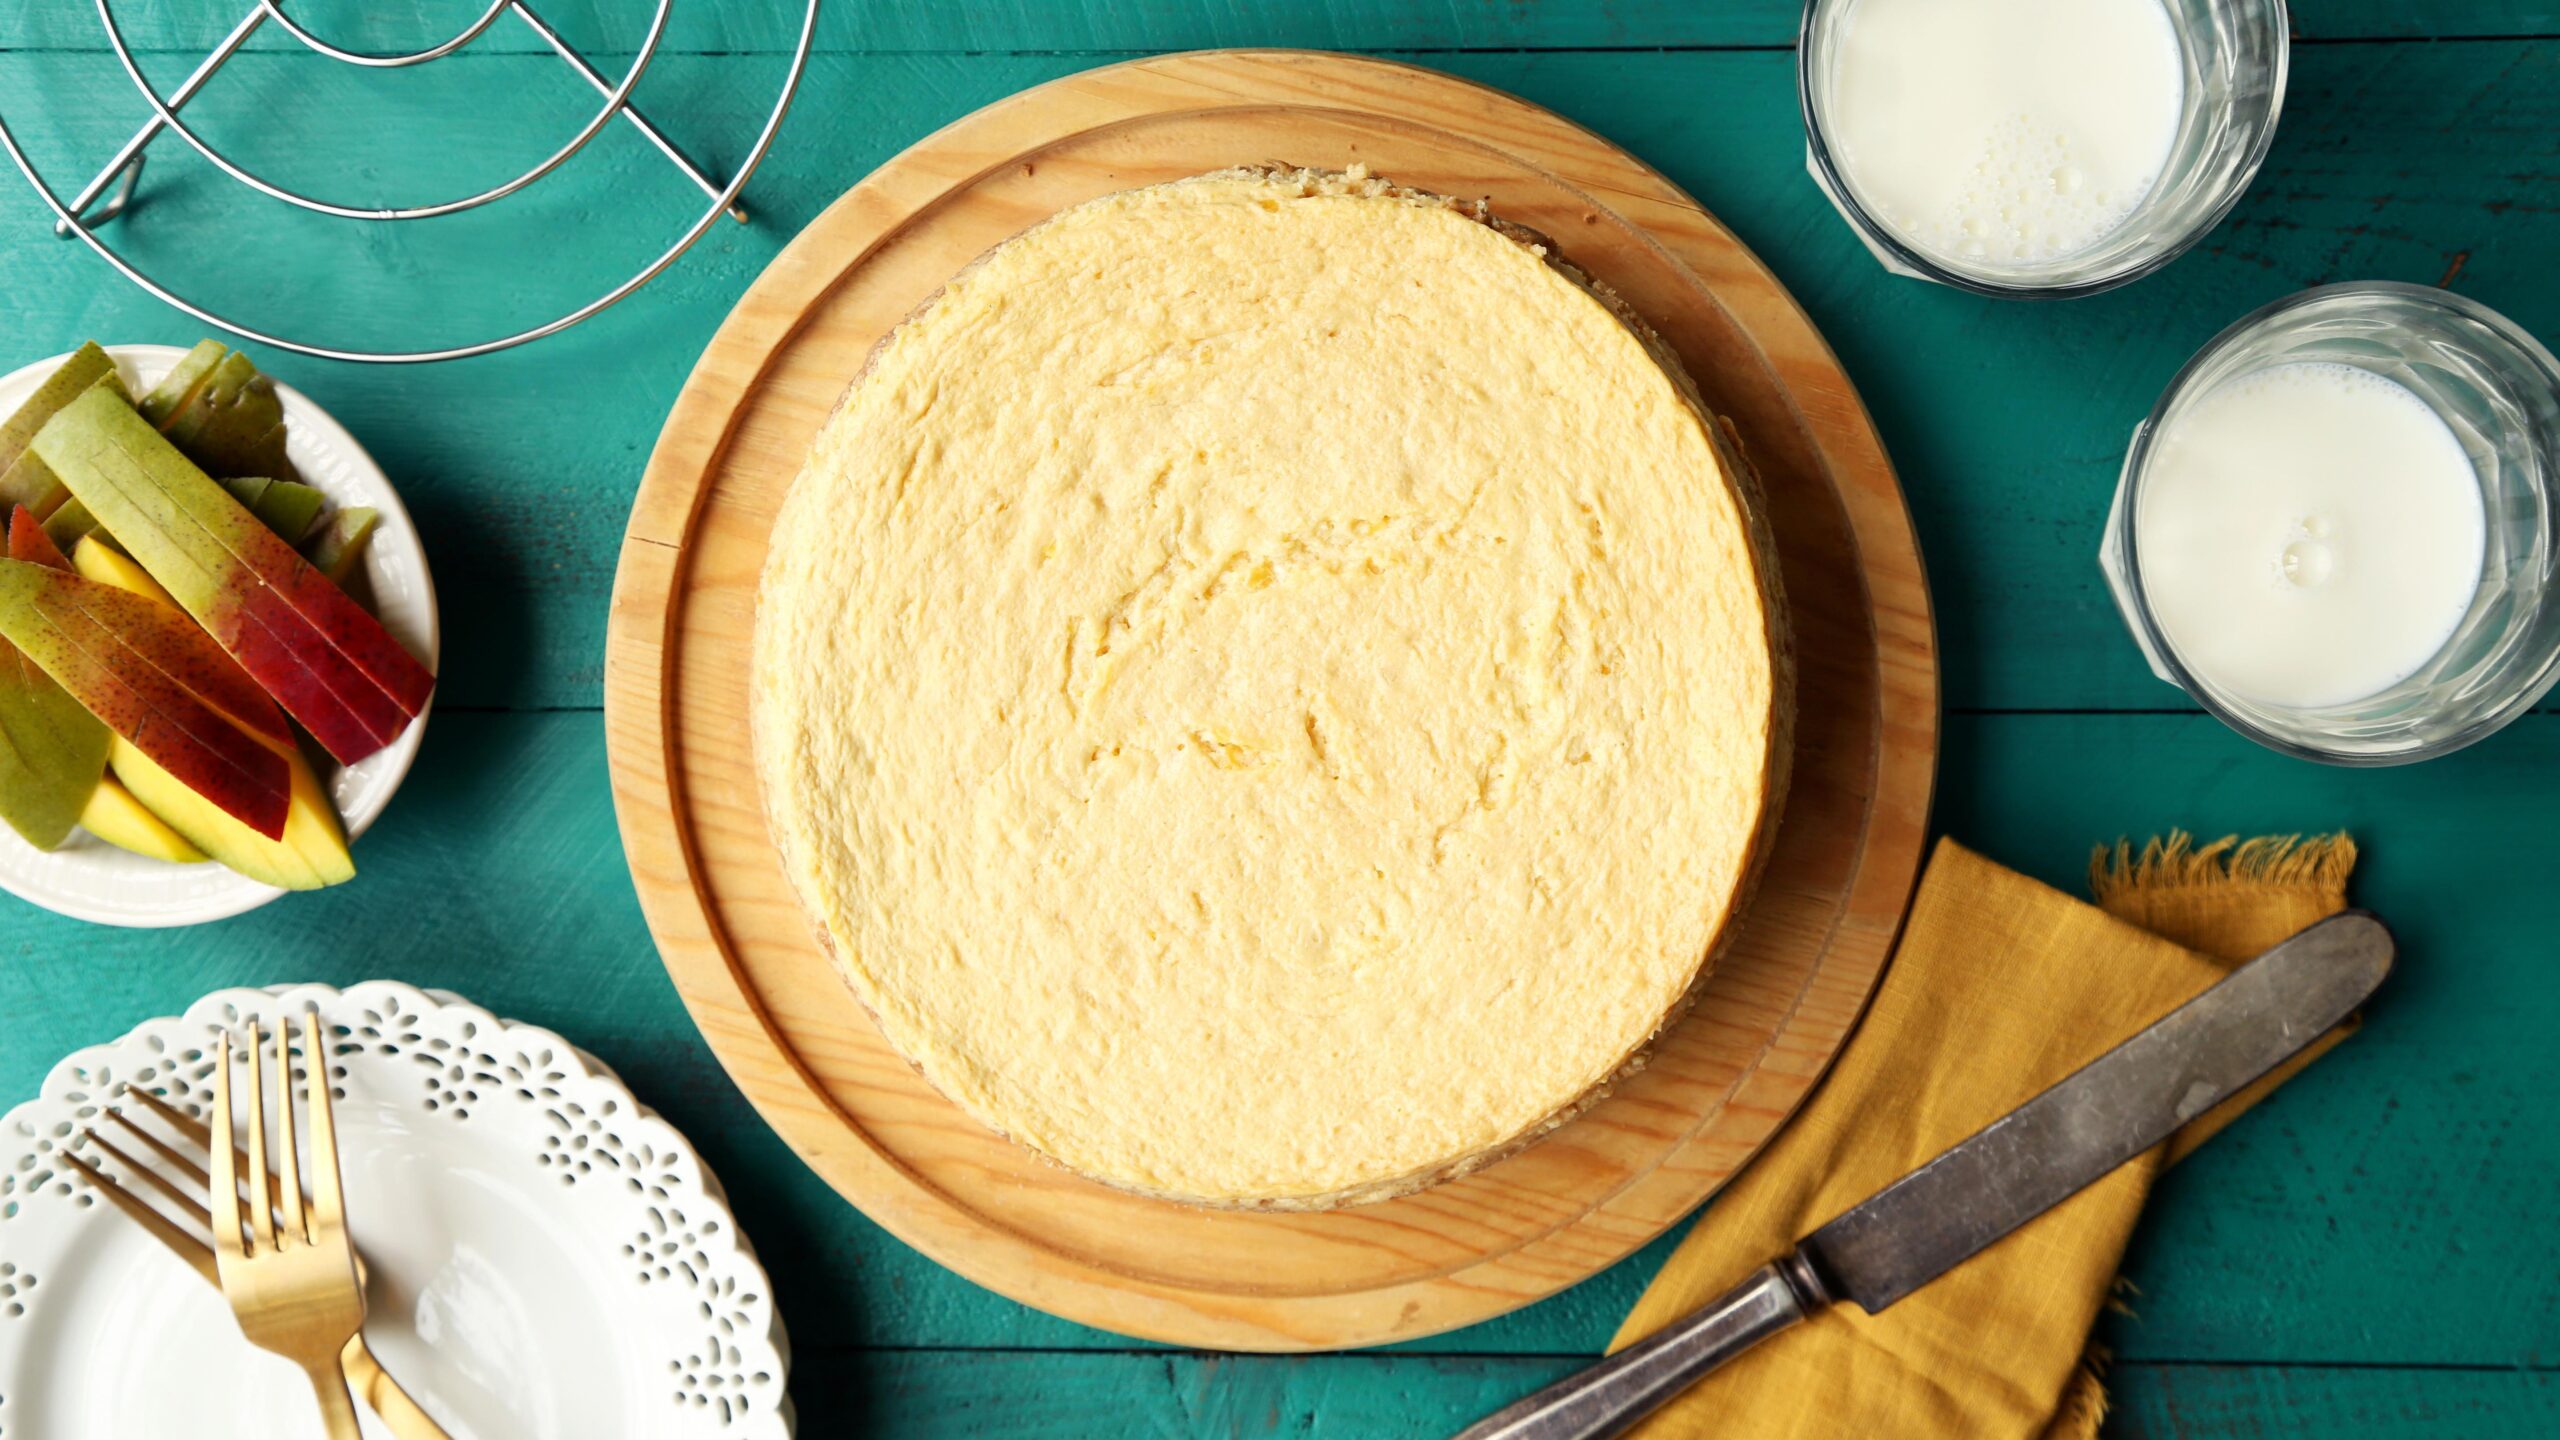  This light and fluffy cheesecake is the perfect treat for any tropical occasion!